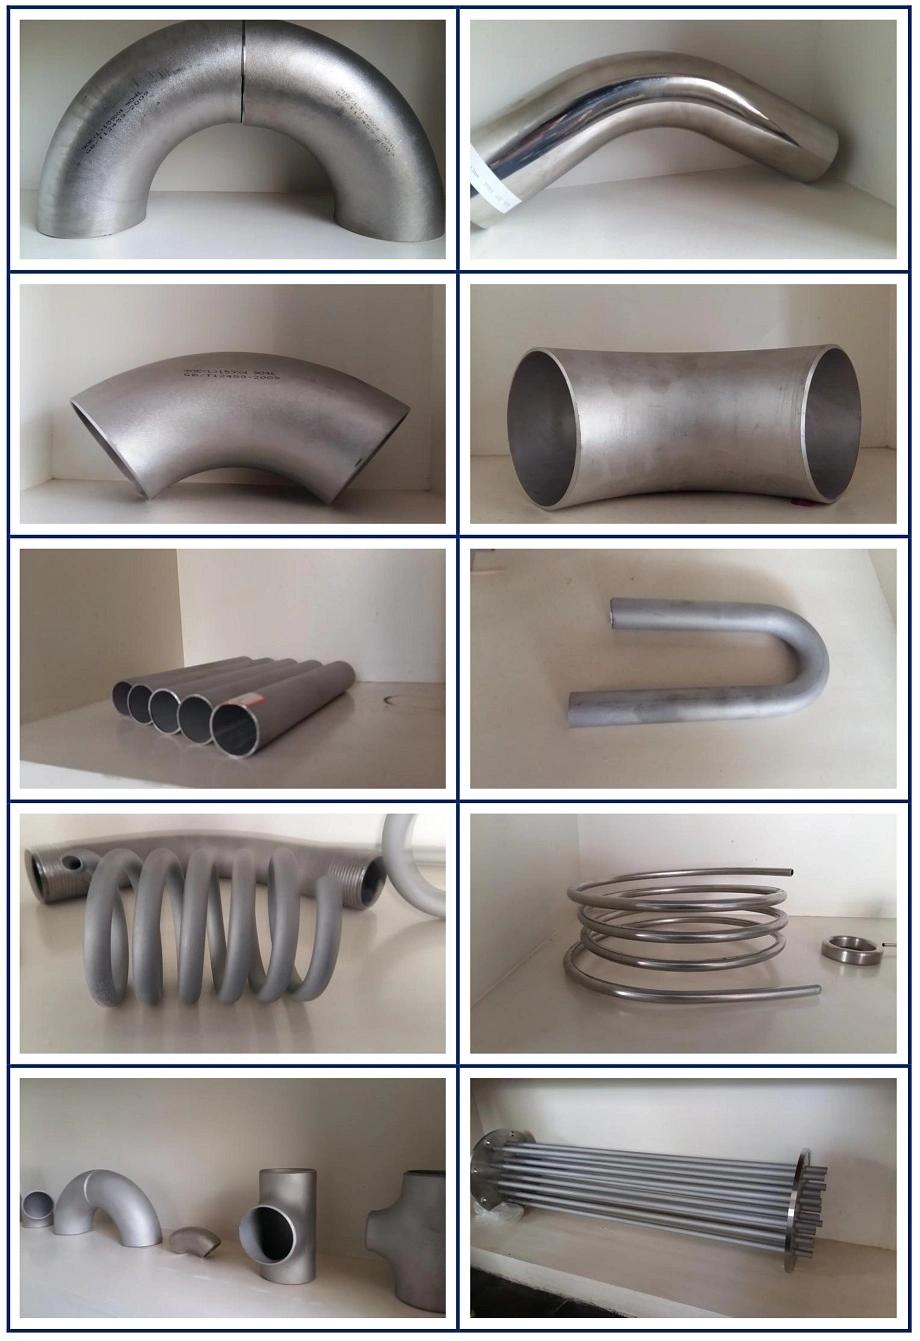 Hygienic Tubing and Fittings Price